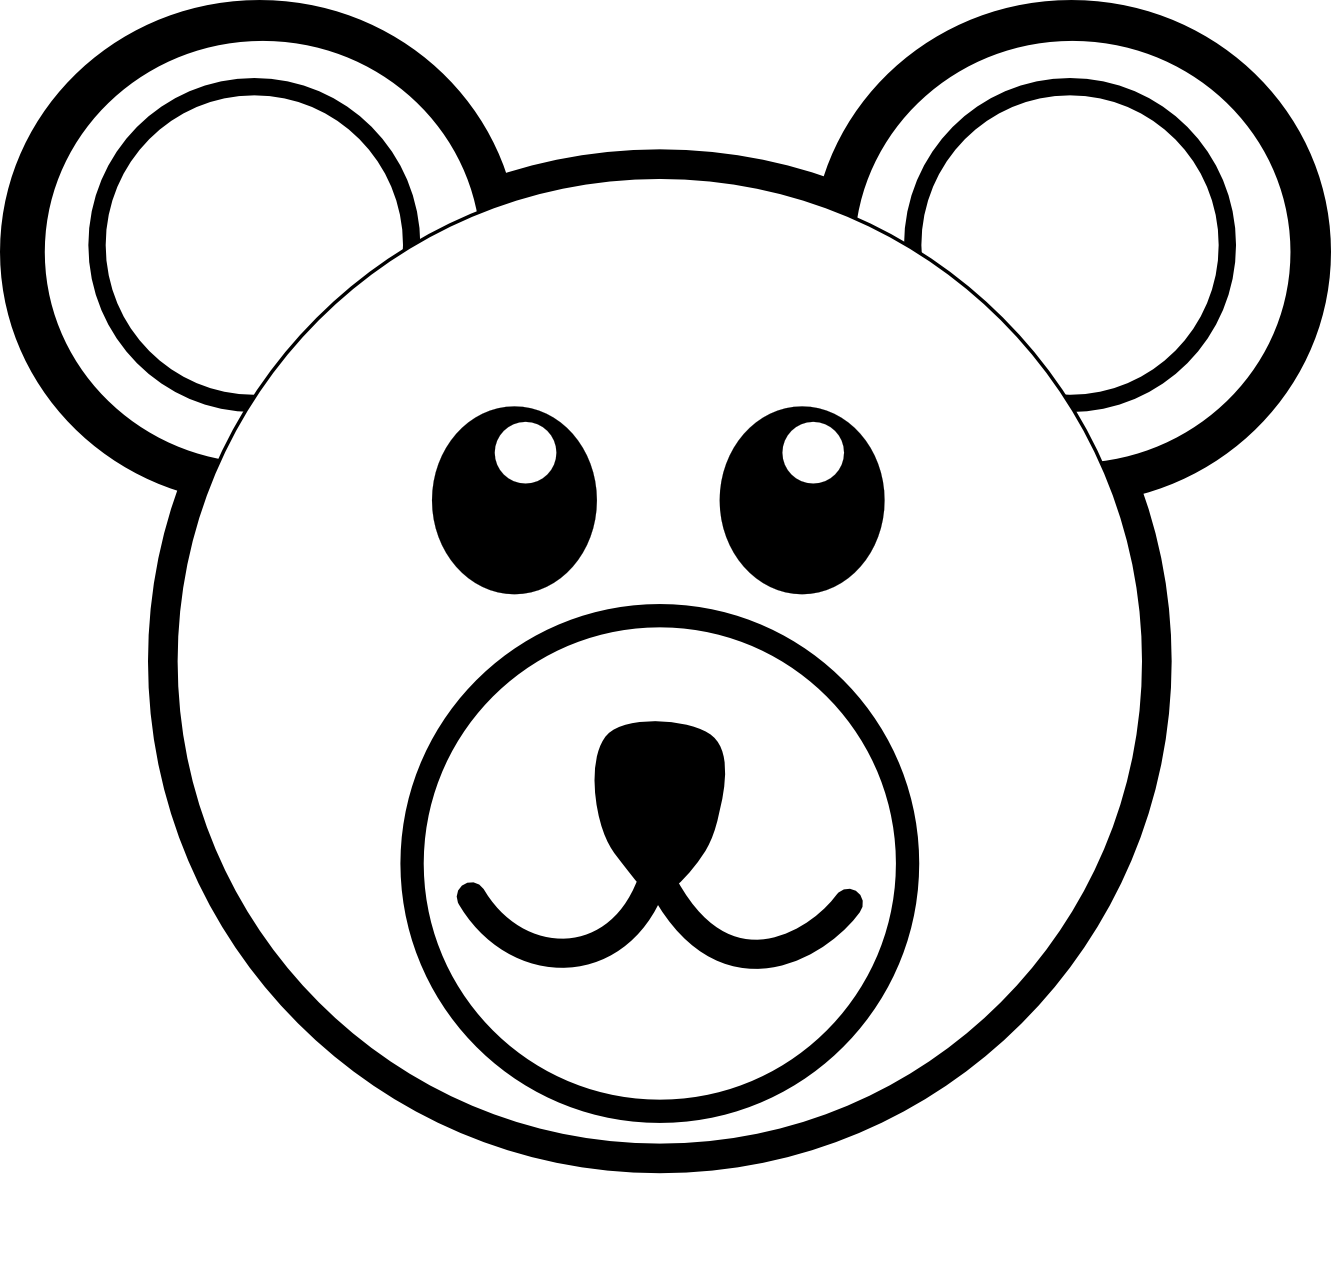 Black bear coloring page - Coloring Pages & Pictures - IMAGIXS